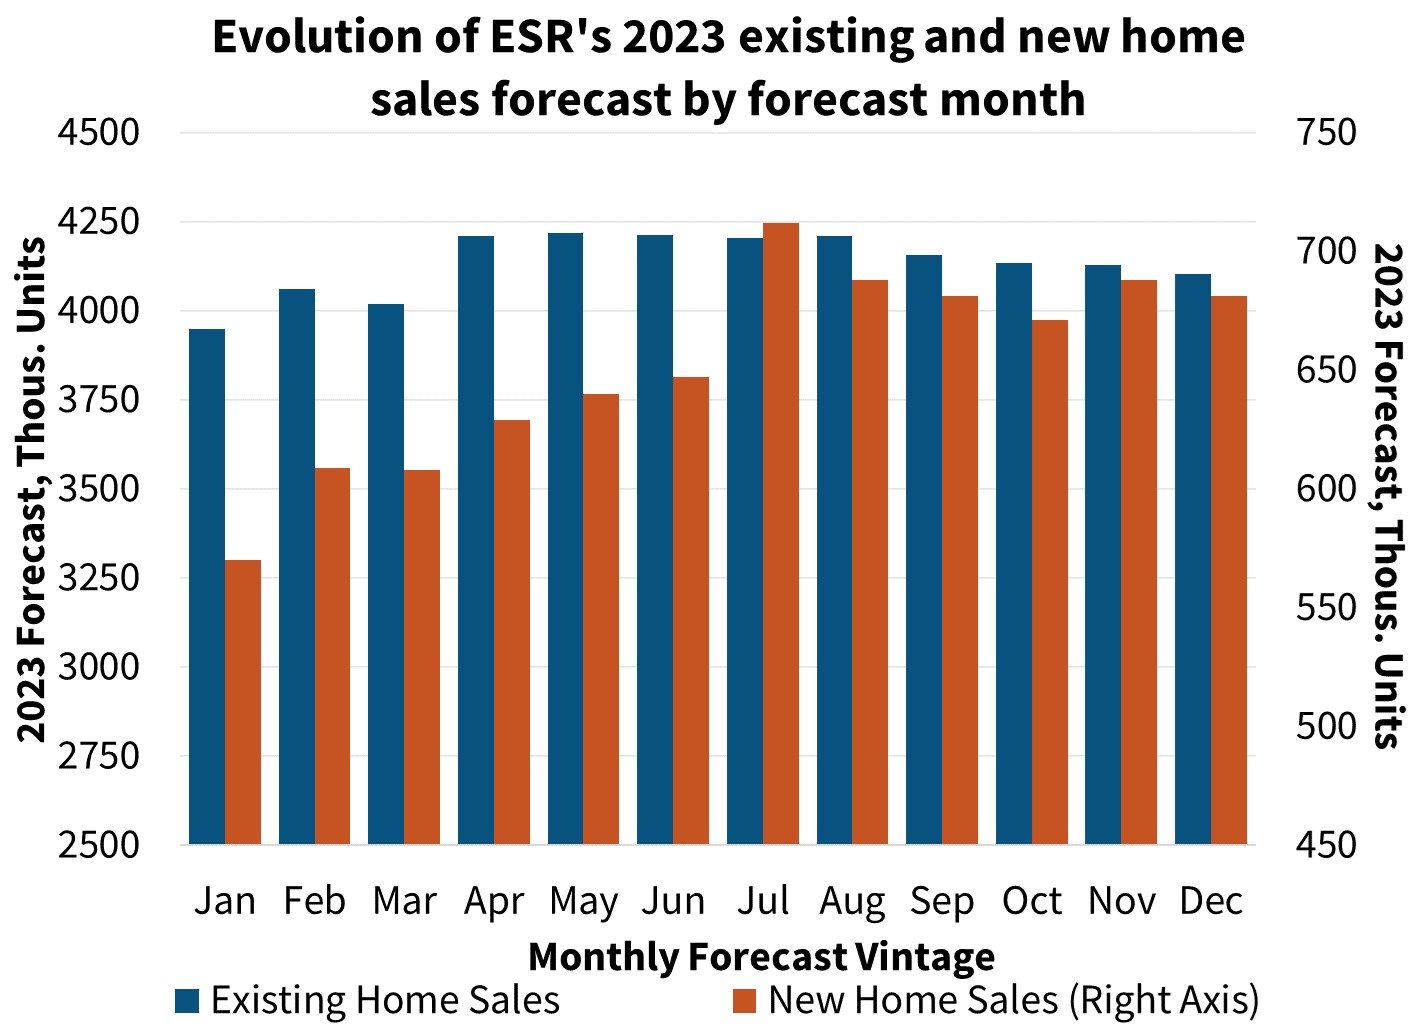 Evolution of ESR's 2023 existing and new home sales forecast by forecast month